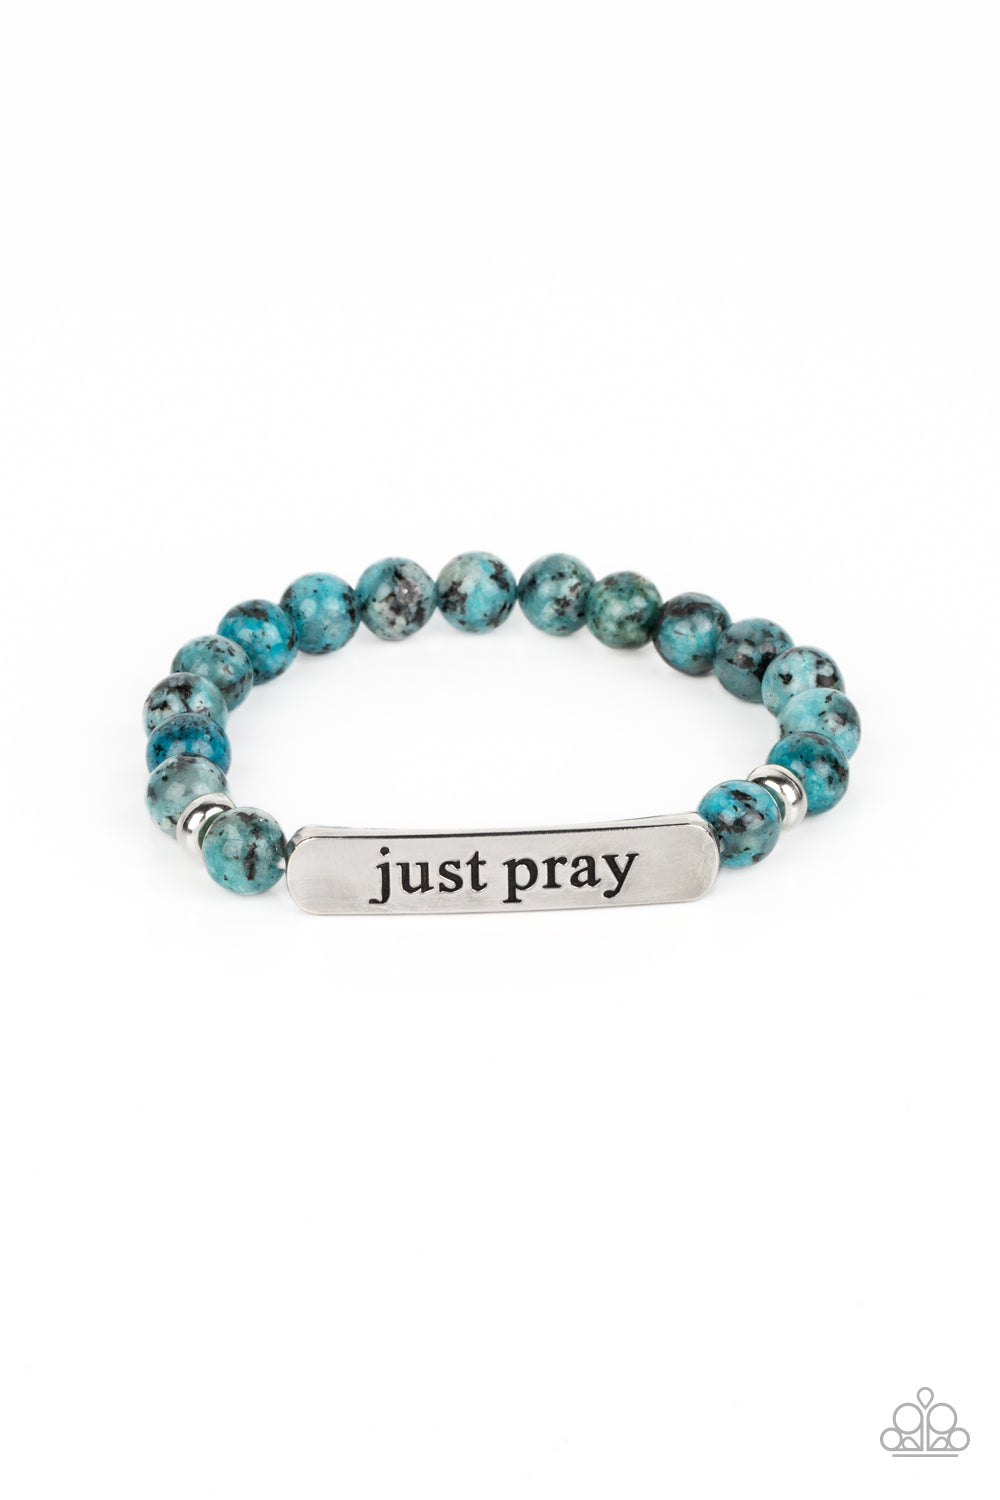 Just Pray - Blue Speckled Stone and Silver Bracelet - Paparazzi Accessories - Smooth, light blue speckled stones are stretched across the wrist on an elastic stretchy band, with accents of silver beads sprinkled in. Meeting in the center of the stony display, a curved rectangular bar is stamped with the phrase "just pray" for an inspiring finish. As the stone elements in this piece are natural, some color variation is normal.